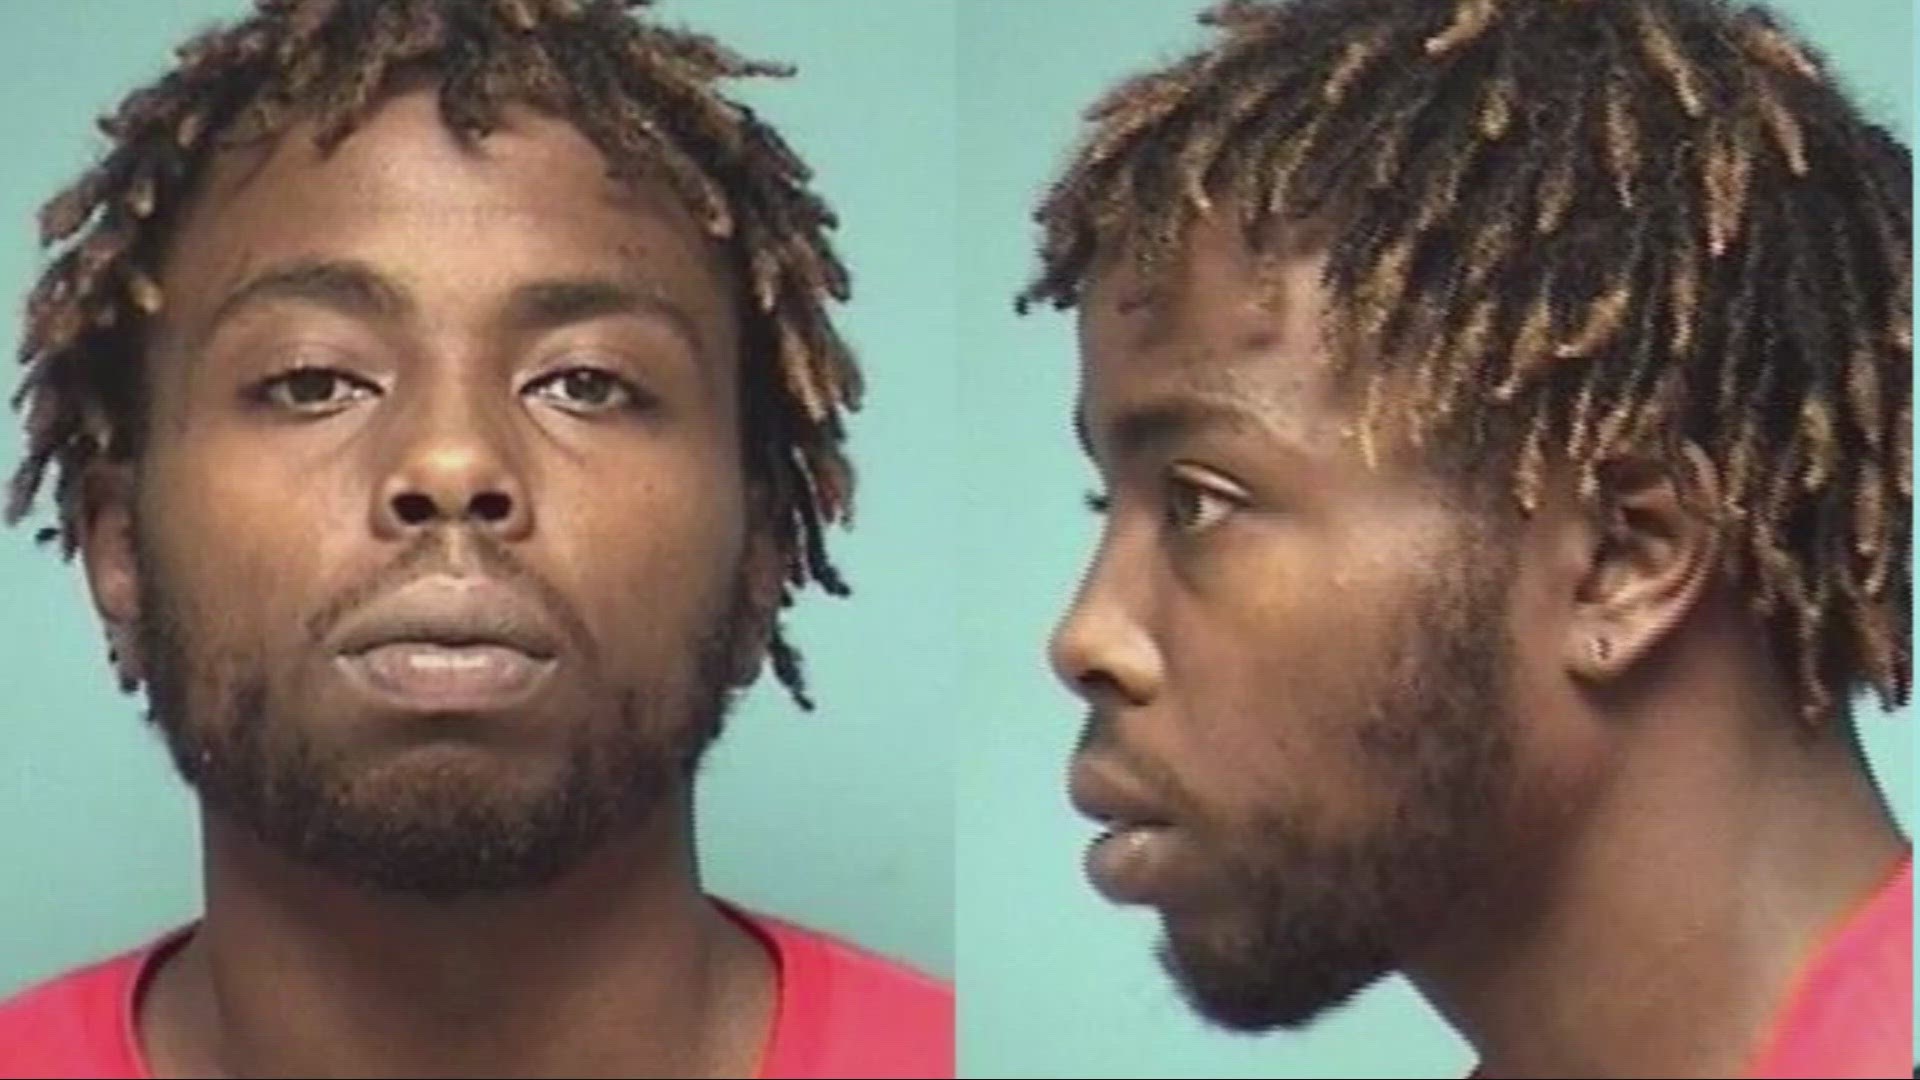 25-year-old Jaylon Jennings is being charged with attempted murder, in connection to a mass shooting on West 6th Street.